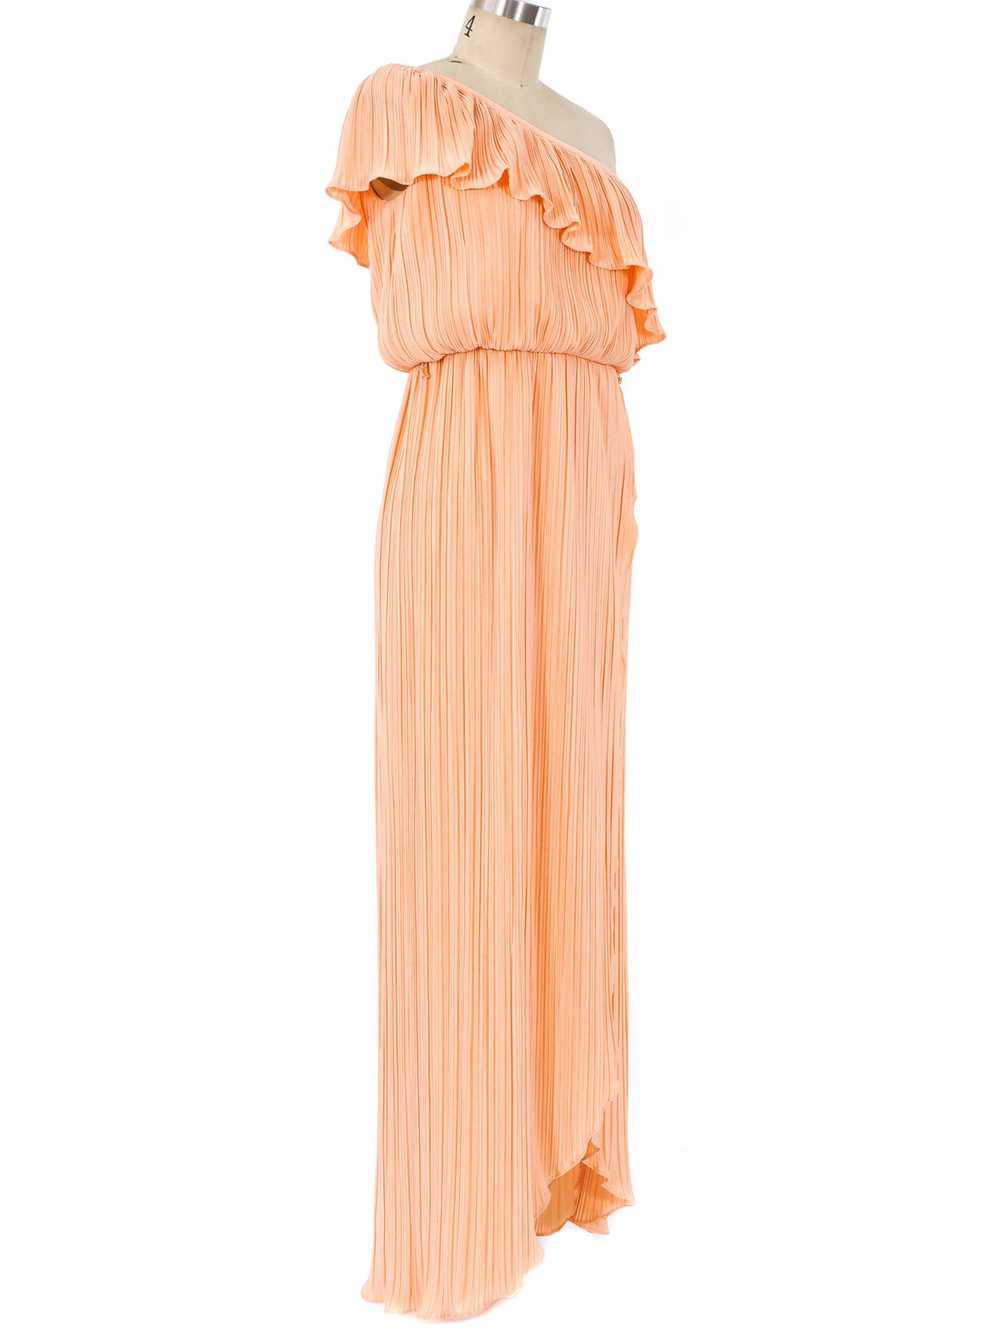 Peach Pleated One Shoulder Dress - image 3